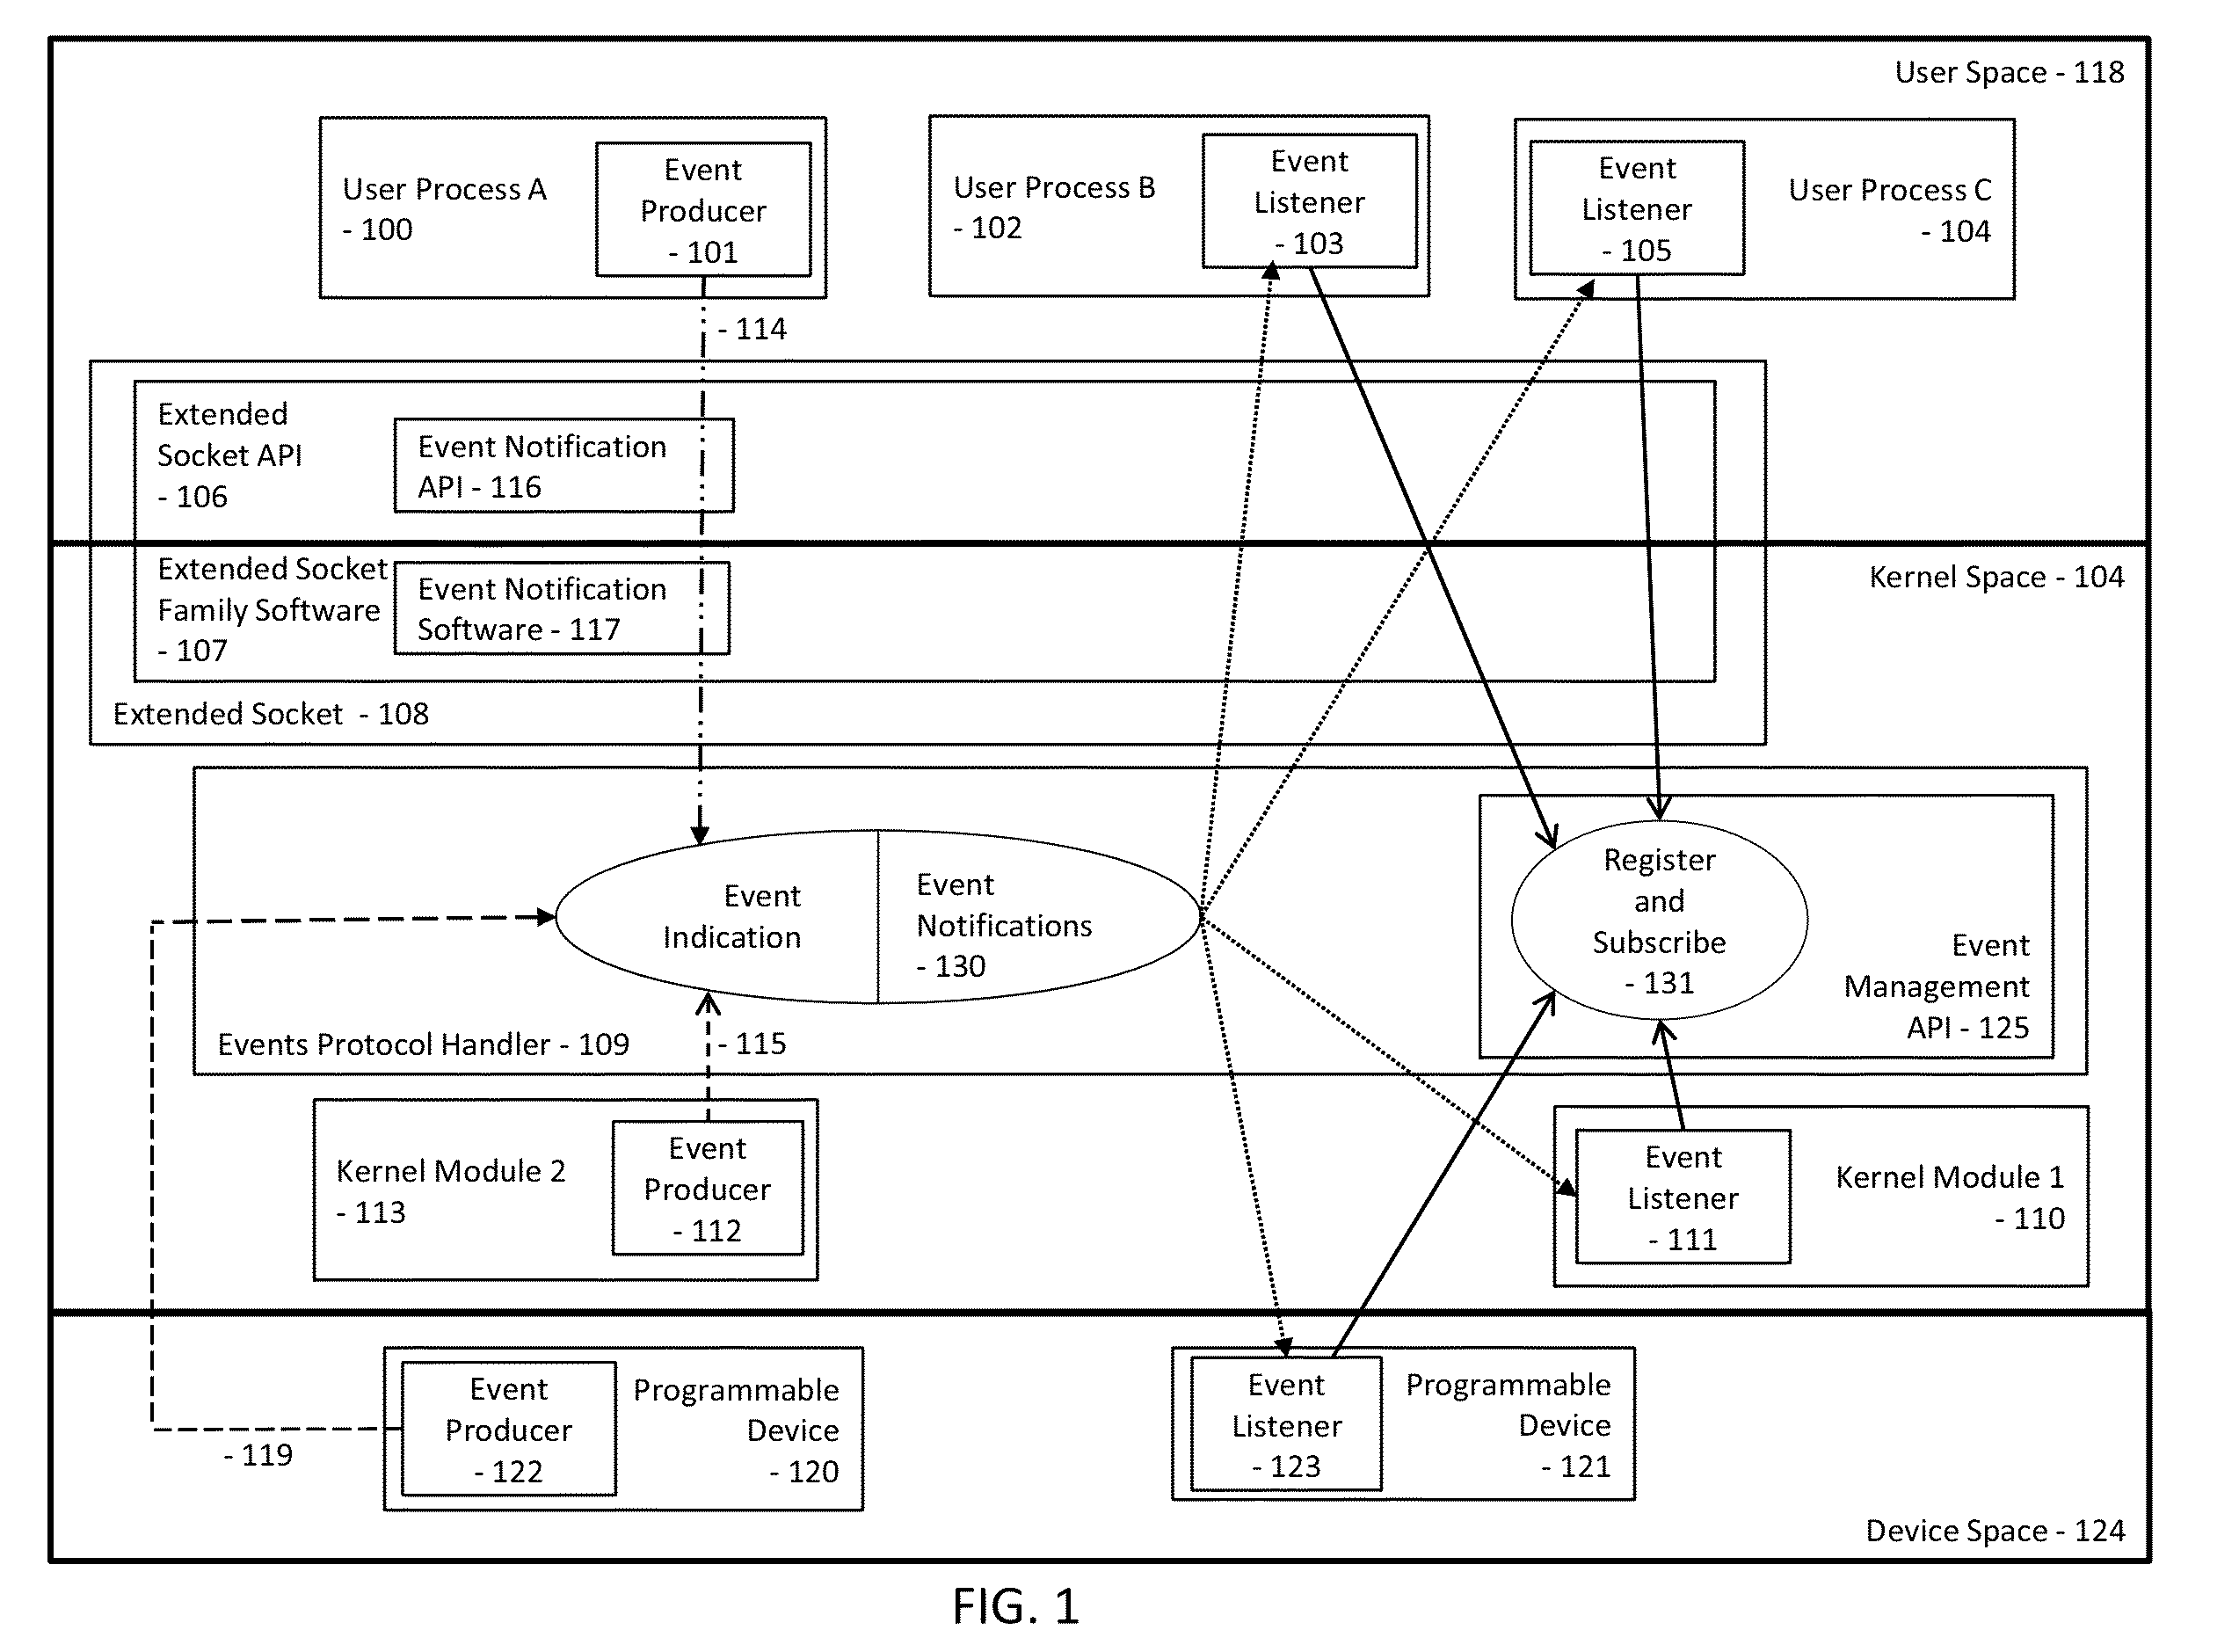 Multicasting of event notifications using extended socket for inter-process communication